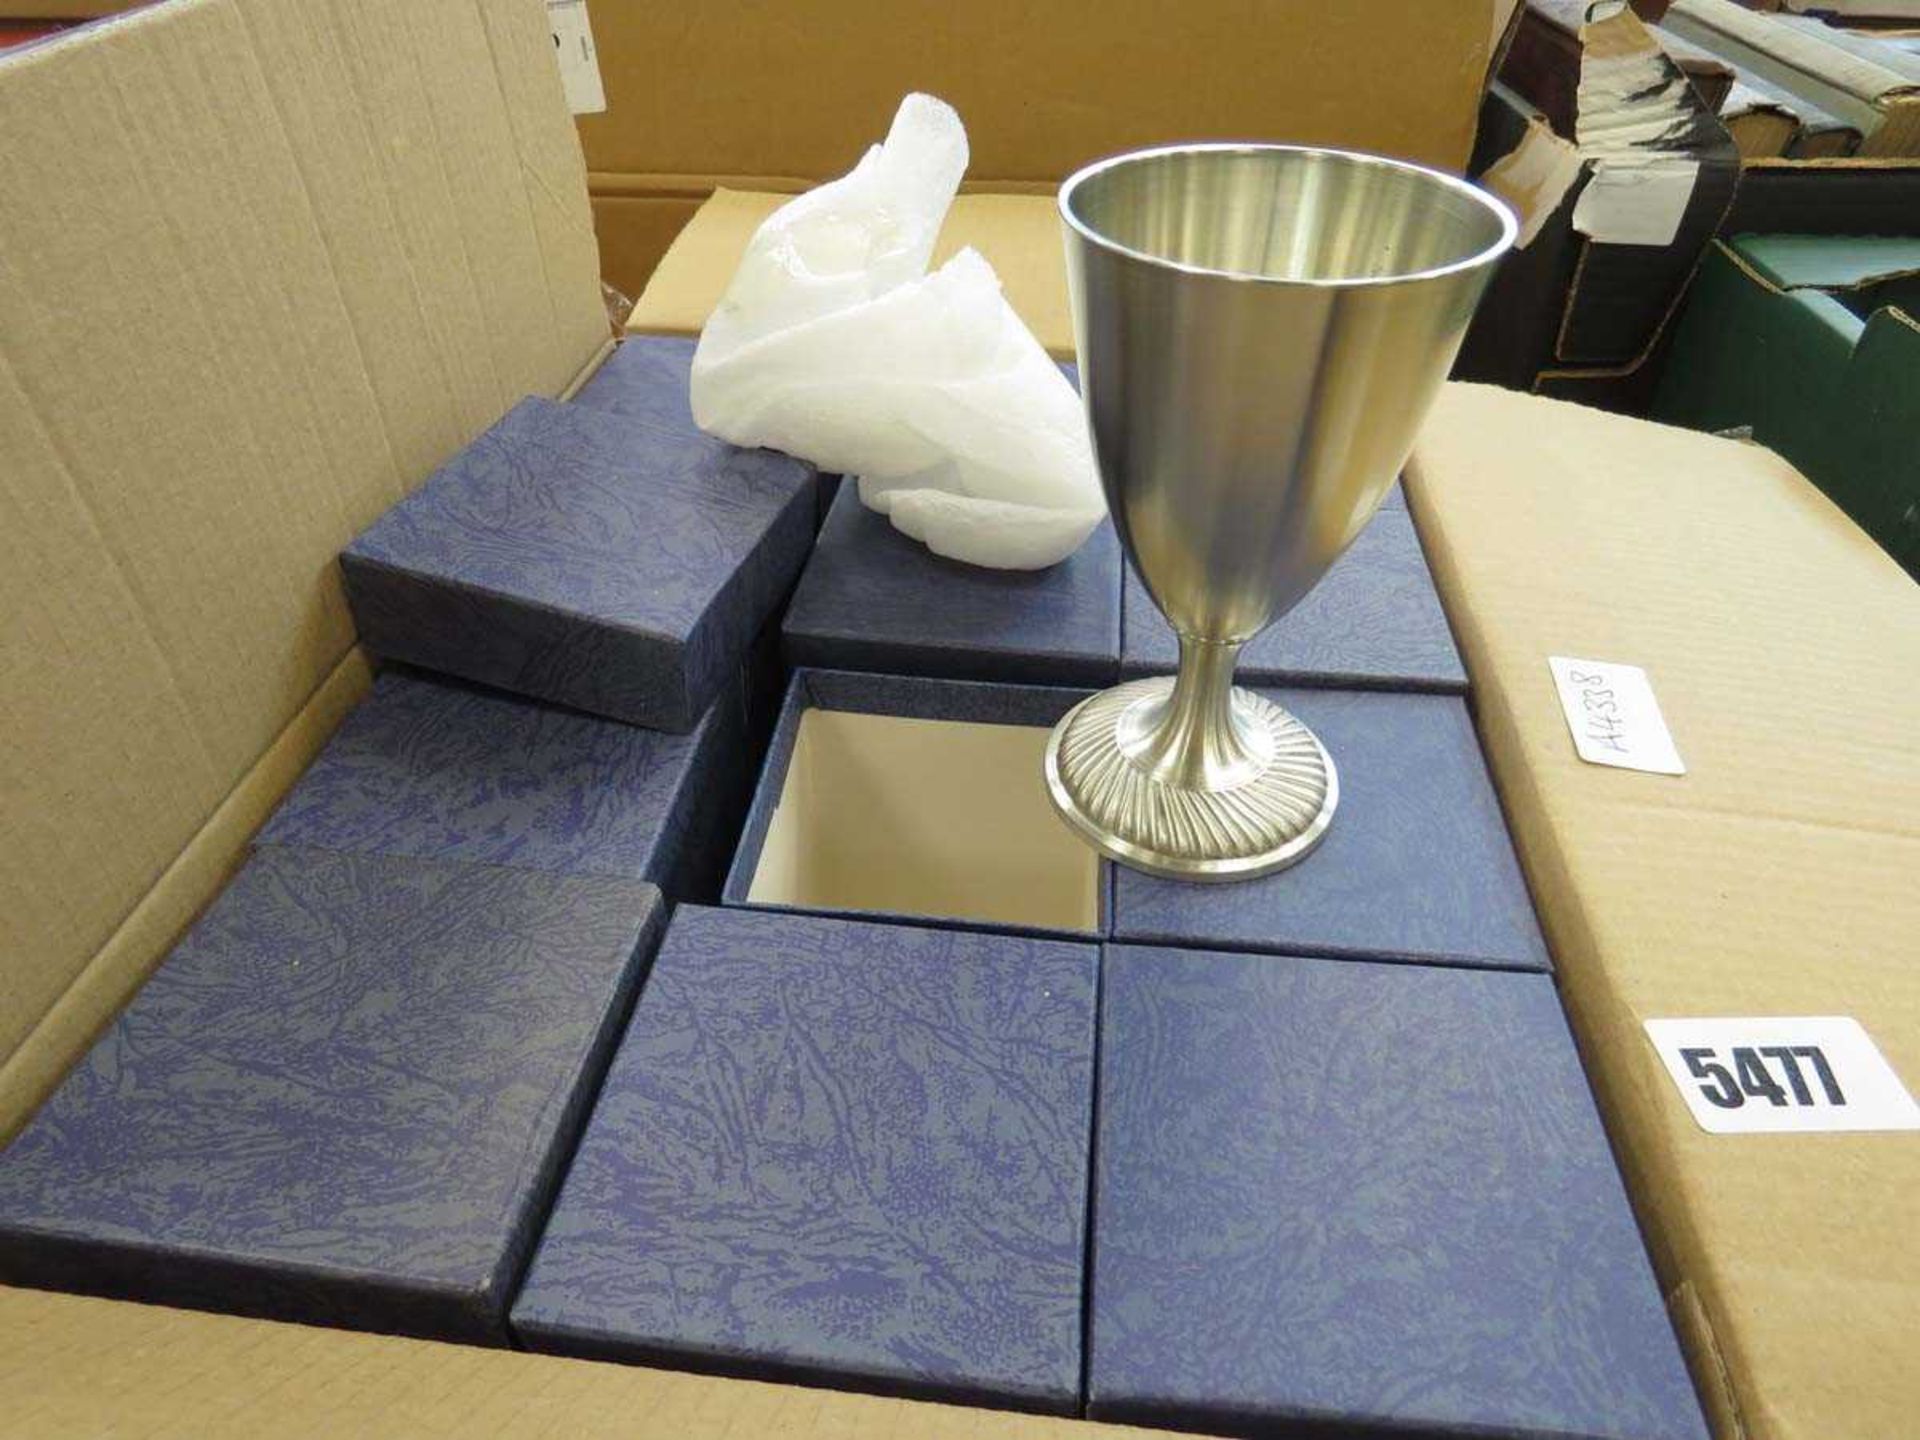 Box containing metal goblets